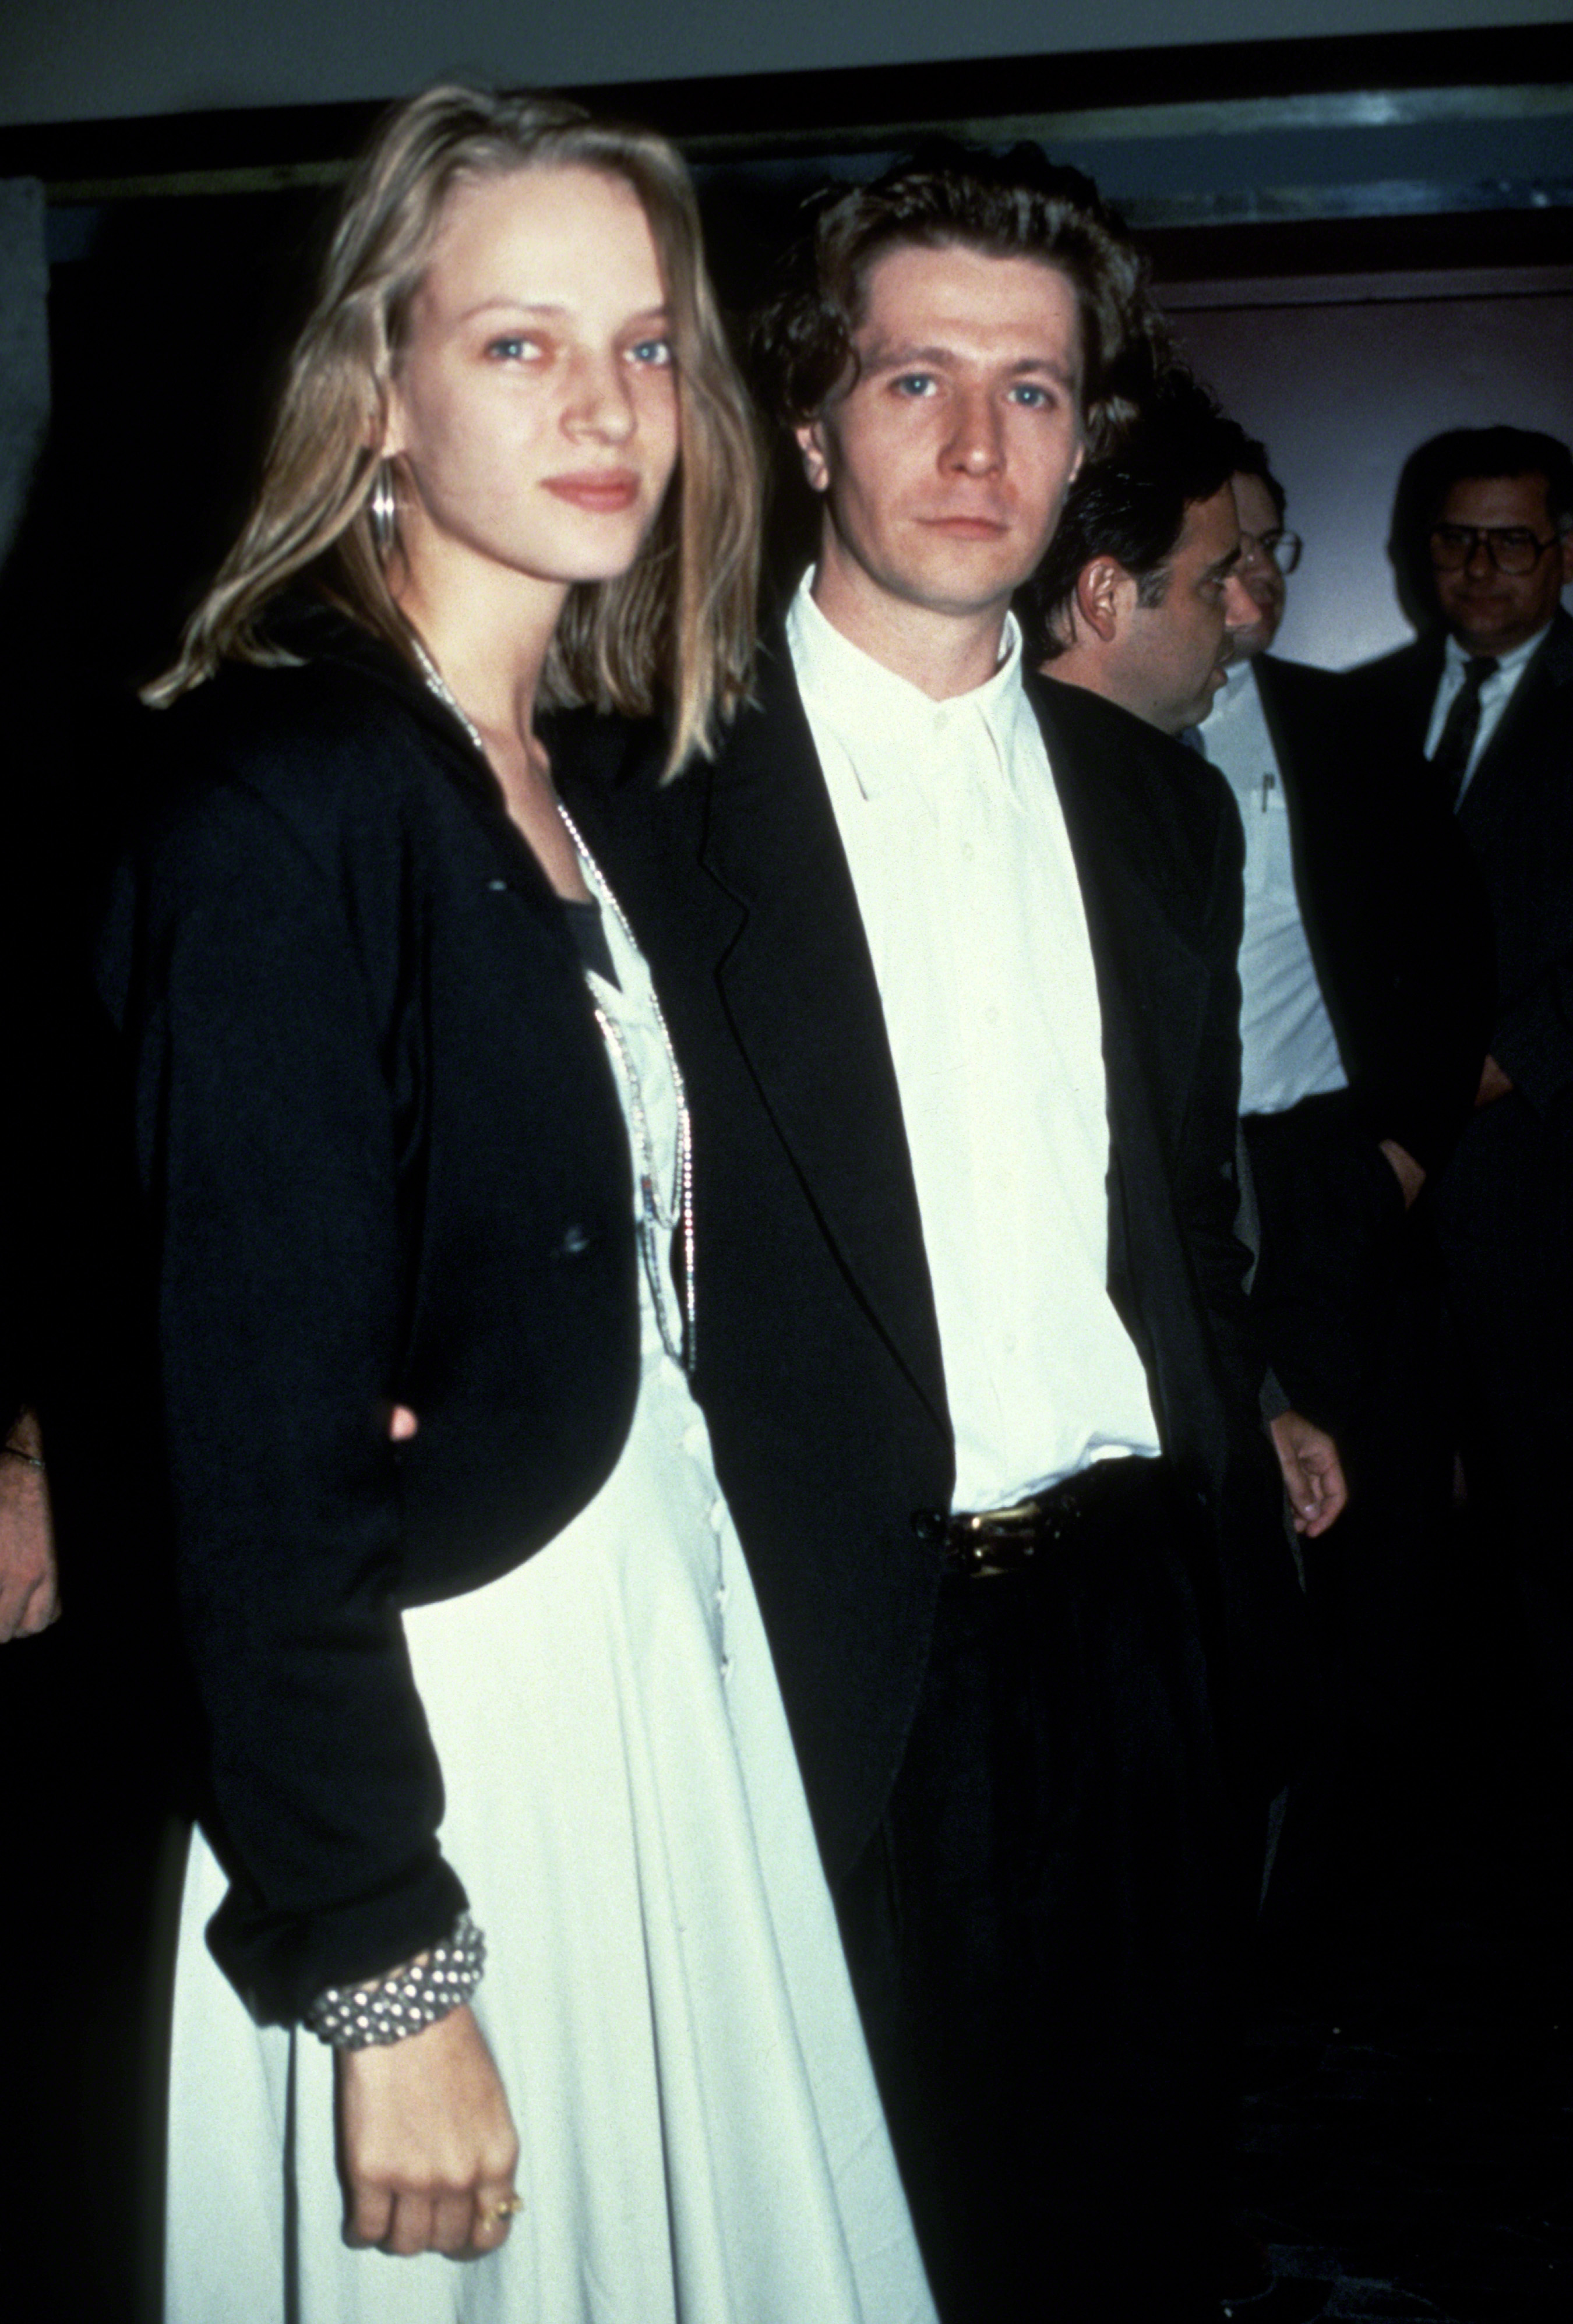 Uma Thurman in a white dress with a black jacket, and Andrew McCarthy in a black suit and white shirt